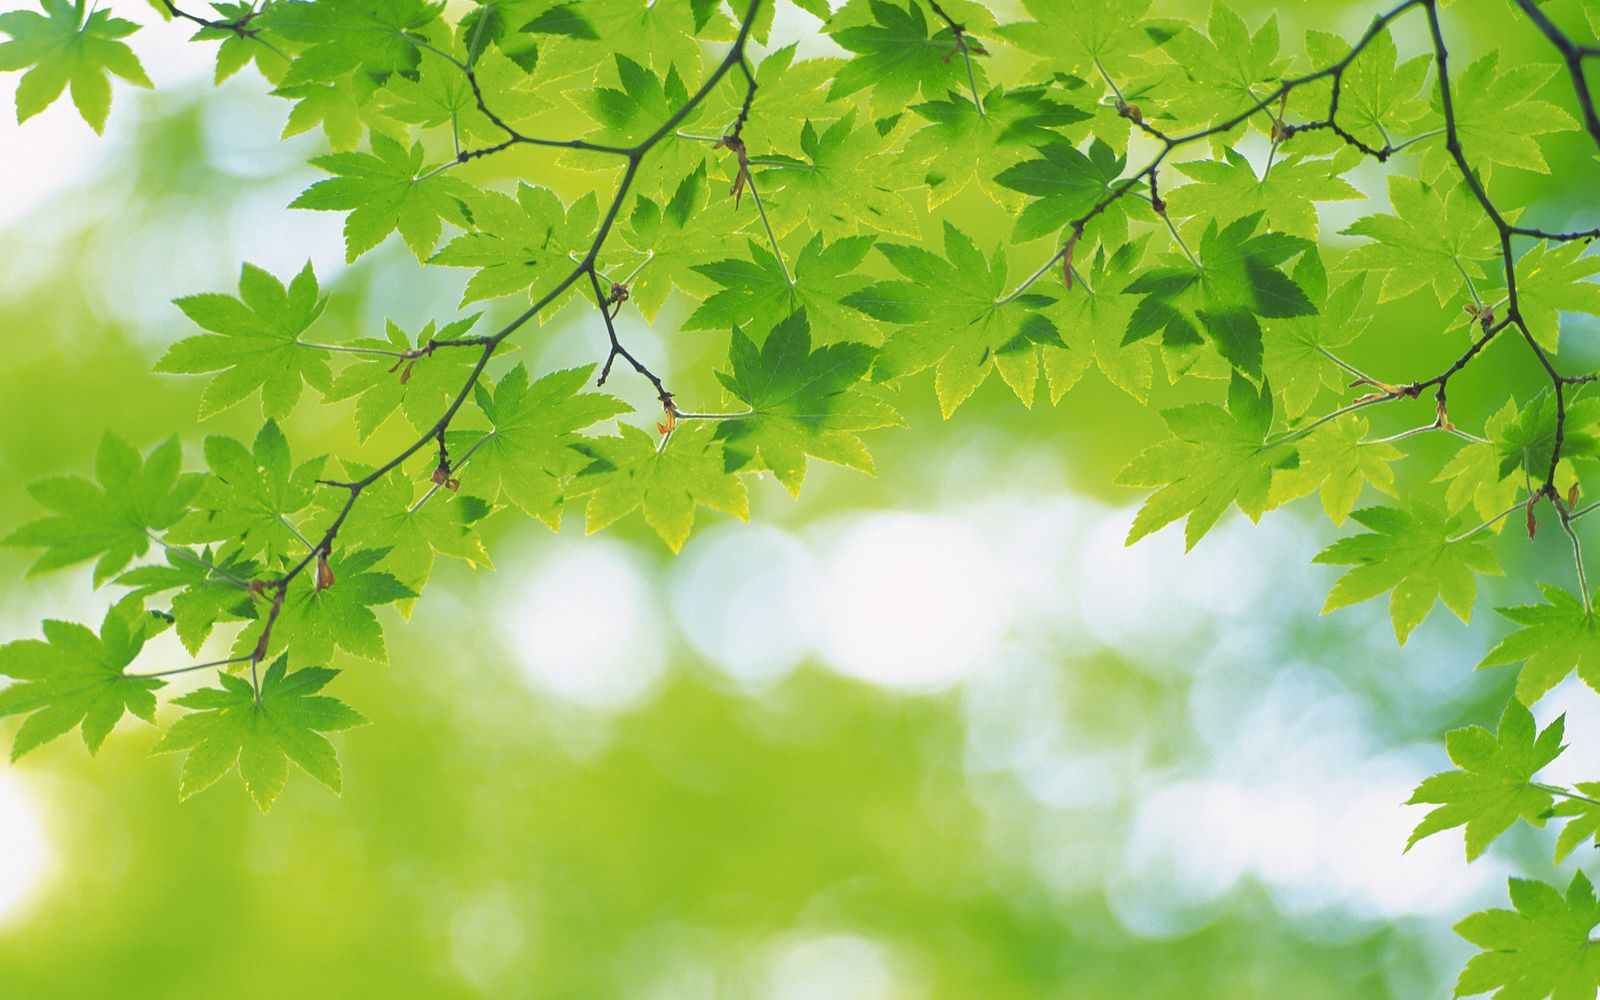 Simple Green Leaves and Green Photo